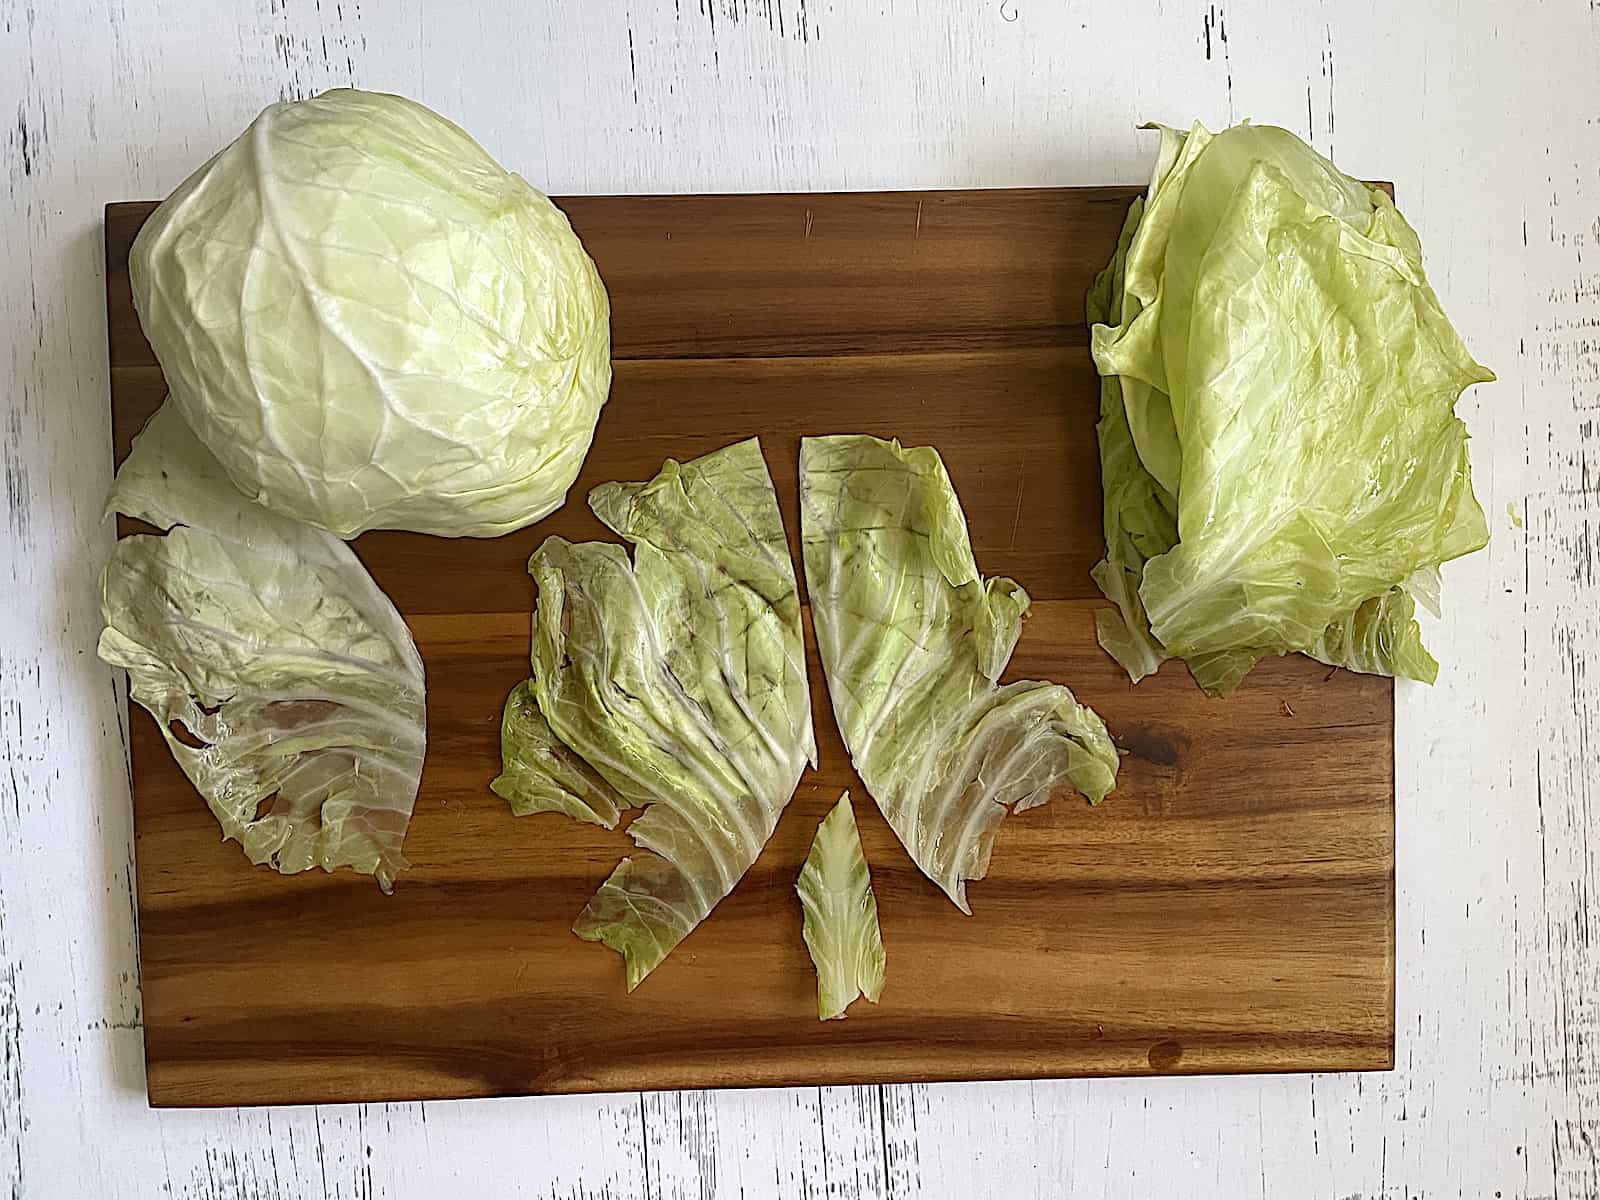 parboiled cabbage with center veins of leaves cut out